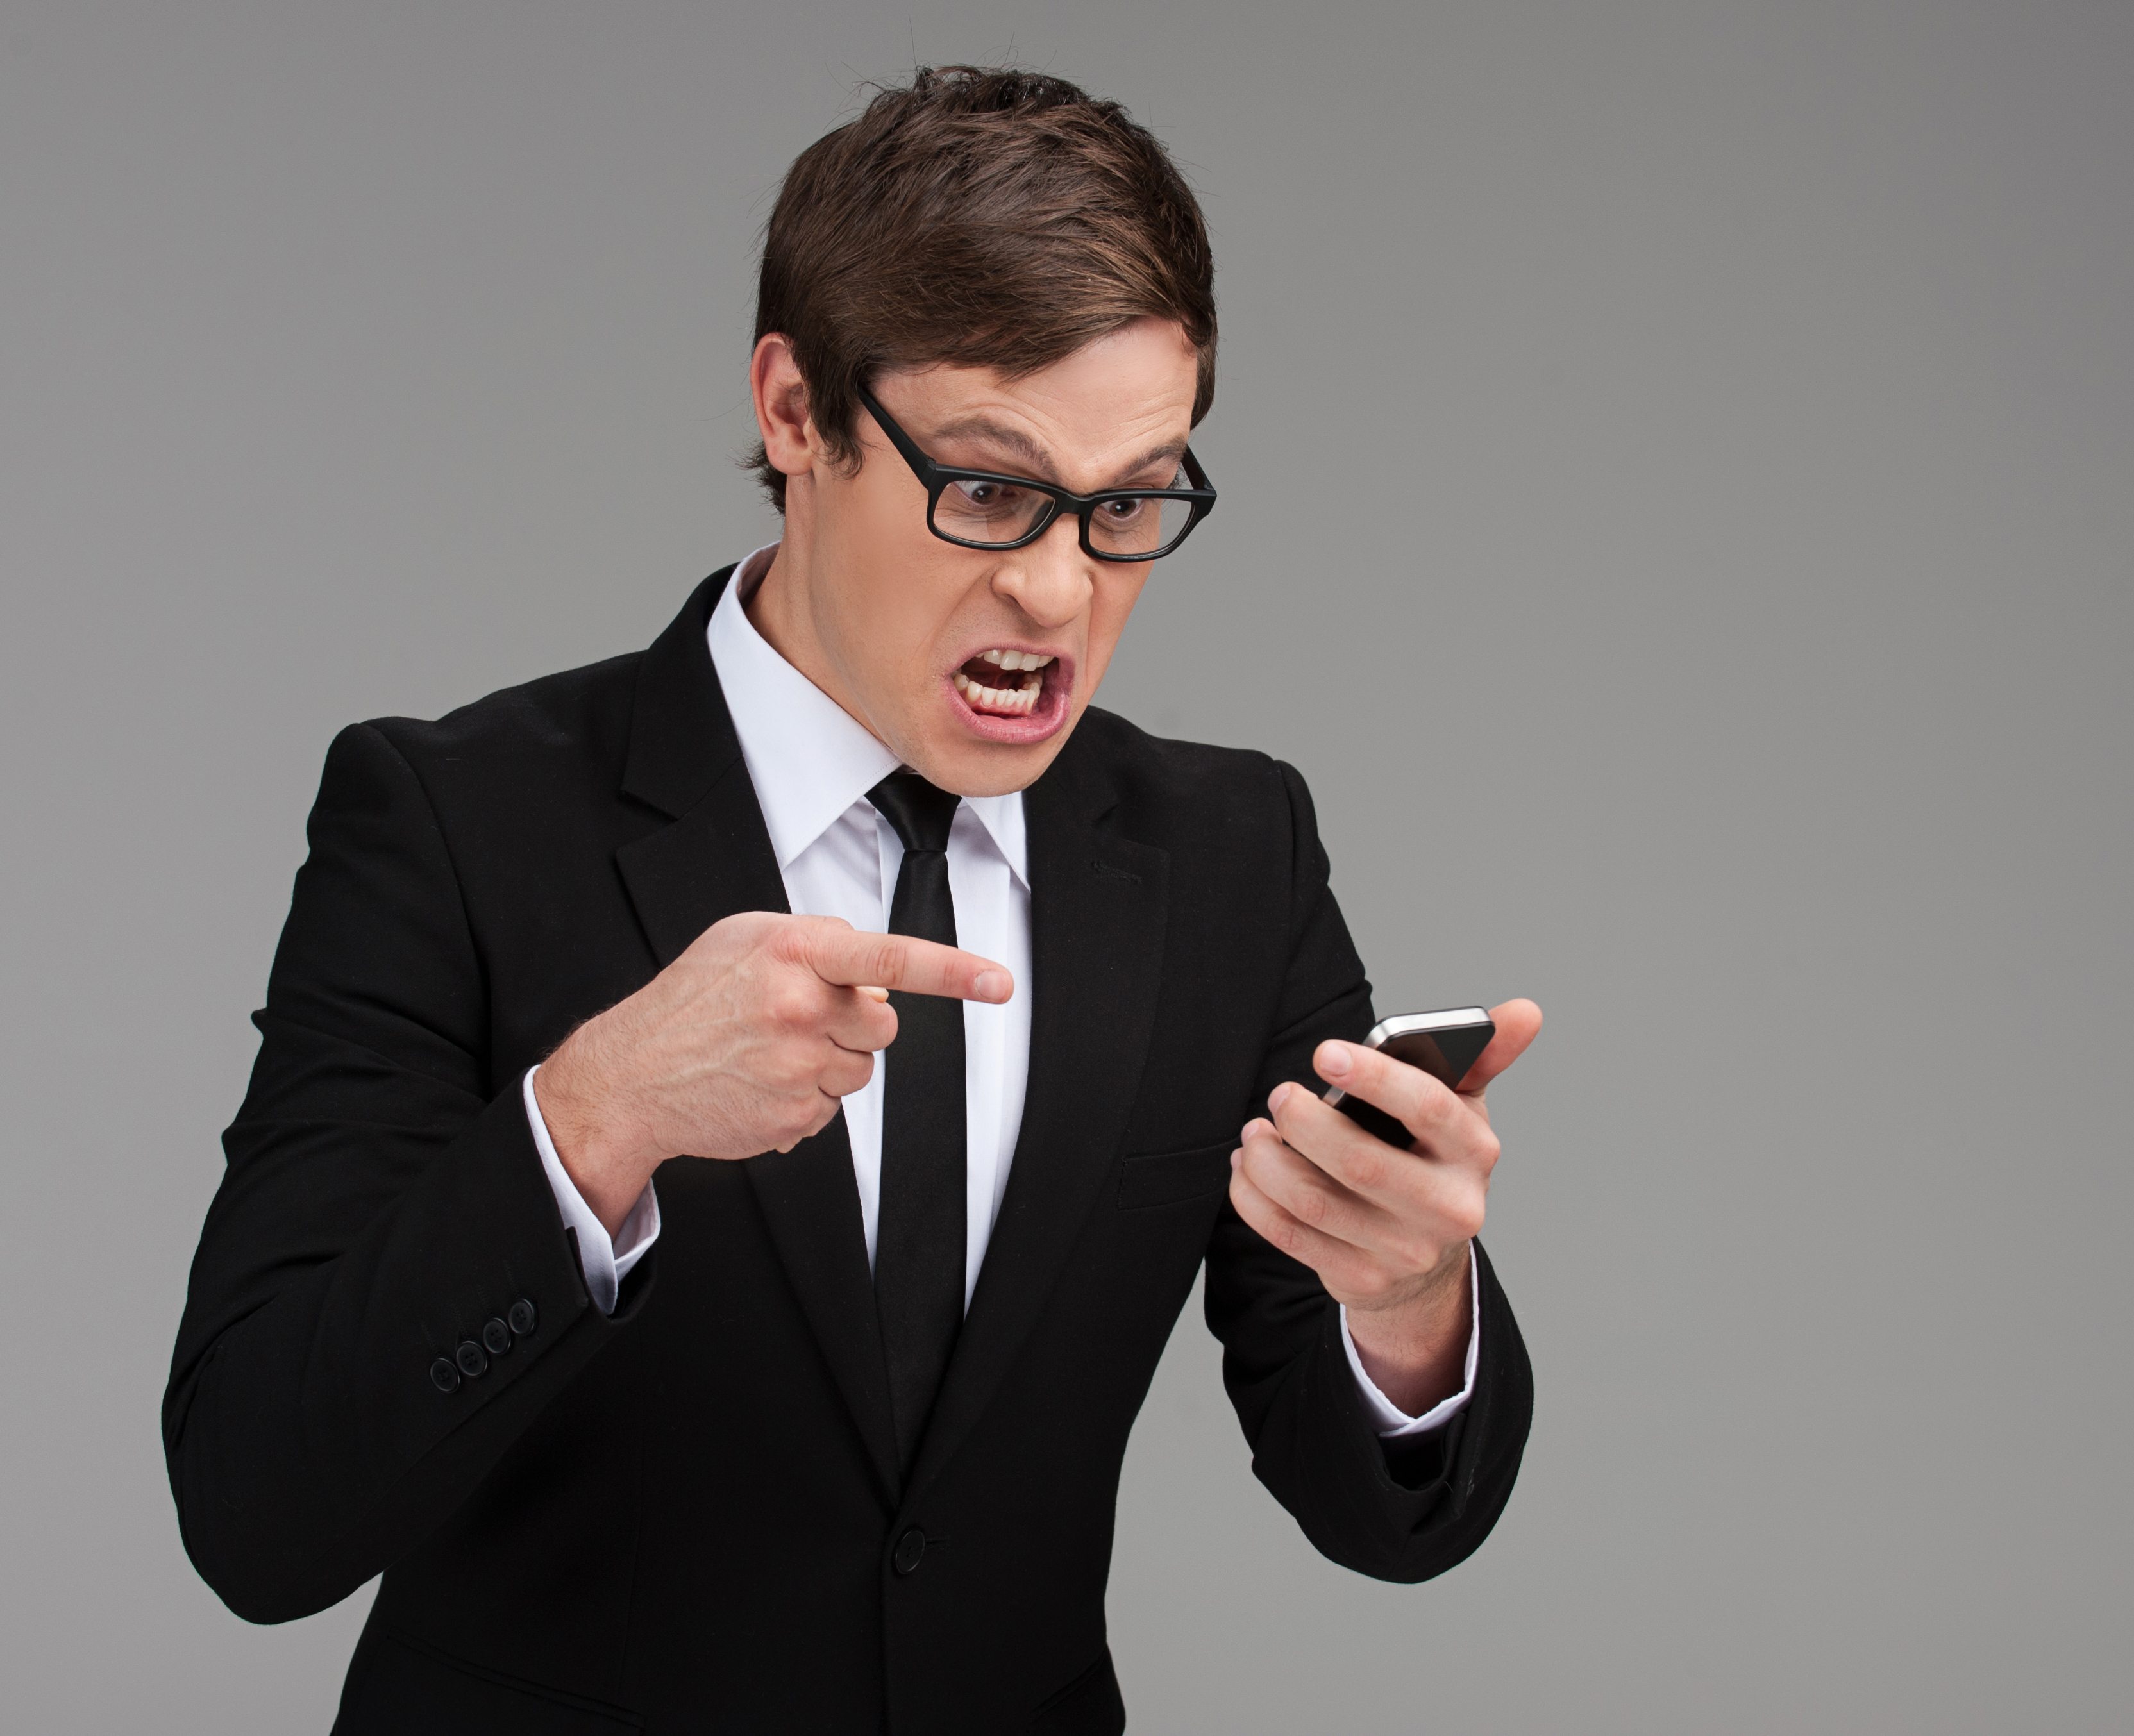 An angry man shouting at a phone | Source: Shutterstock